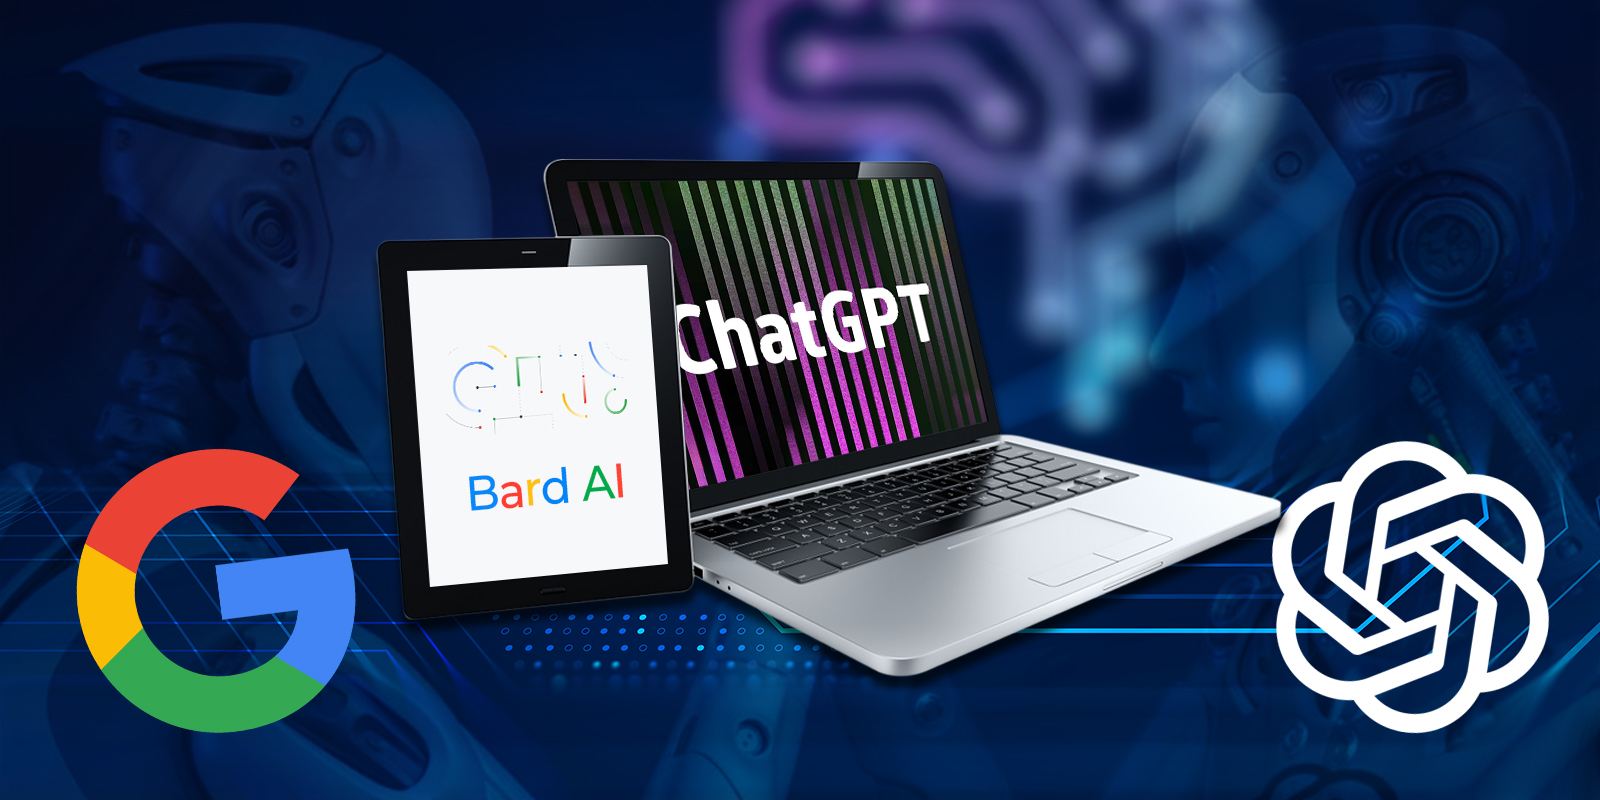 Google Bard AI, a competitor to new Bing with ChatGPT